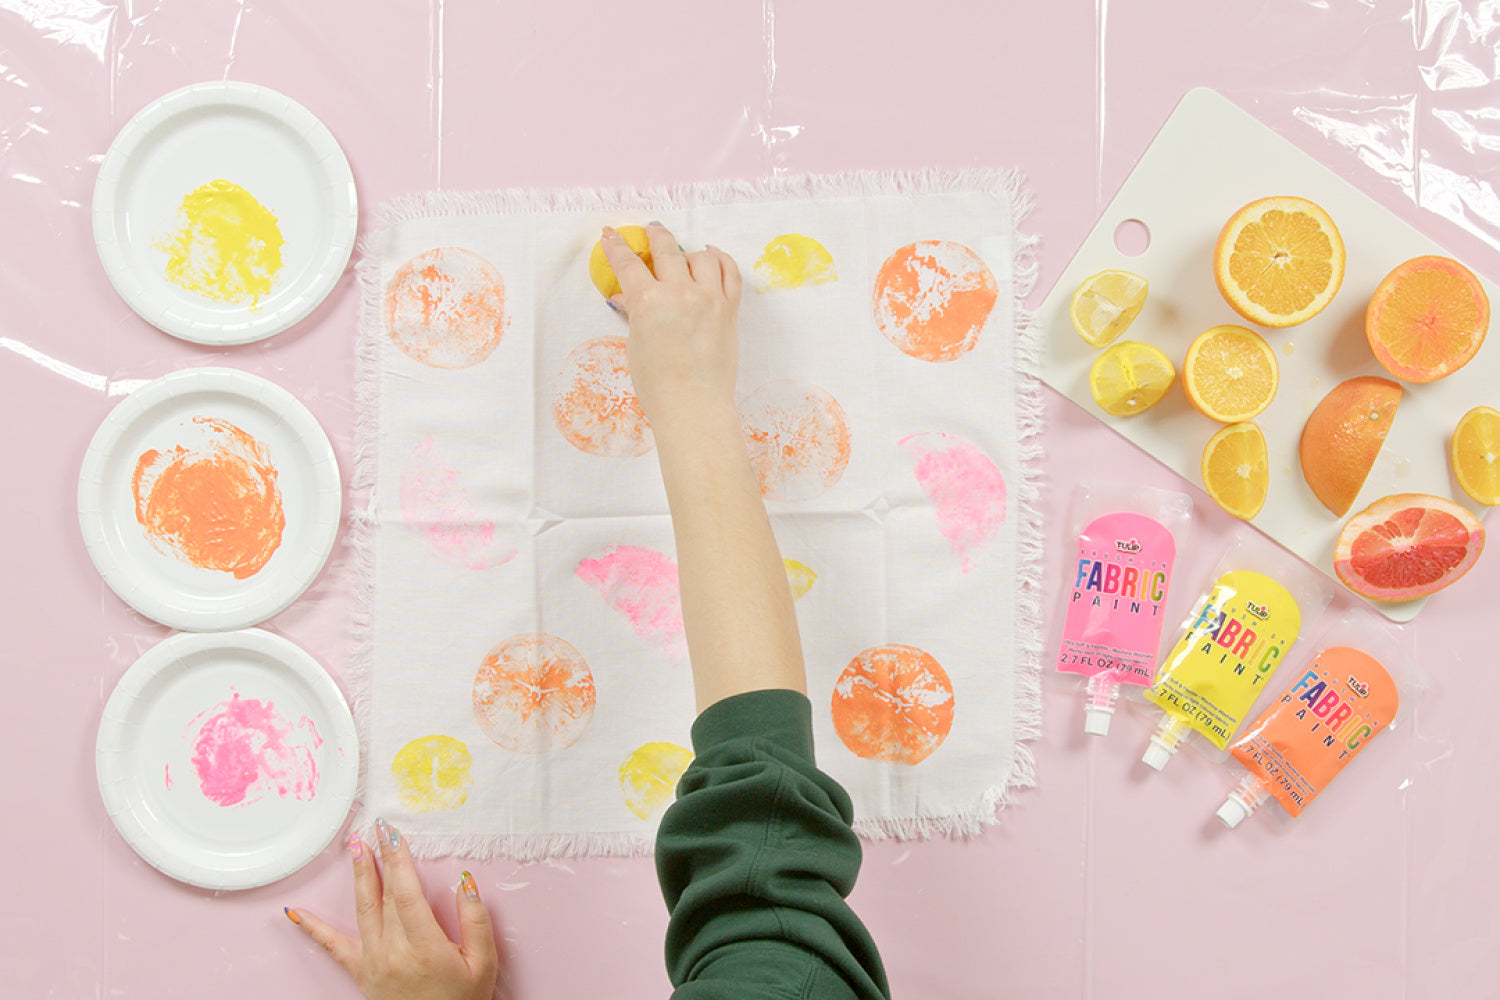 Repeat to create a custom napkin with assorted fruit prints